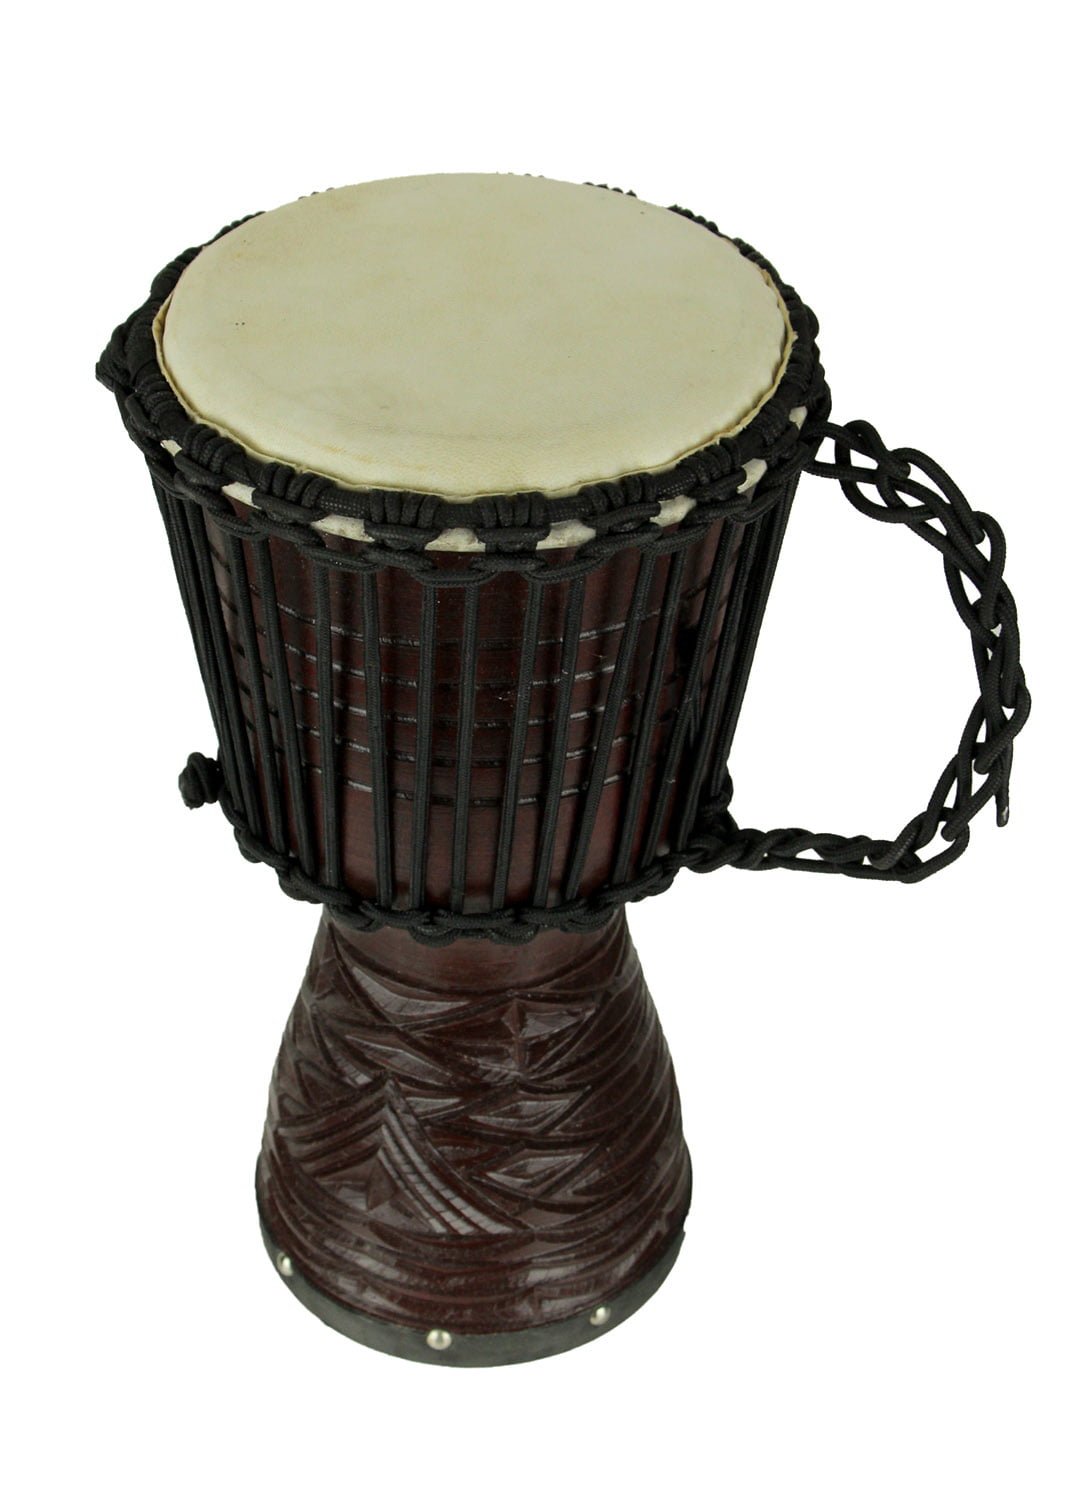 Adinkra Symbols Carving Hand-carved Djembe Drum From Africa 11x22 Classical Heartwood Djembe 